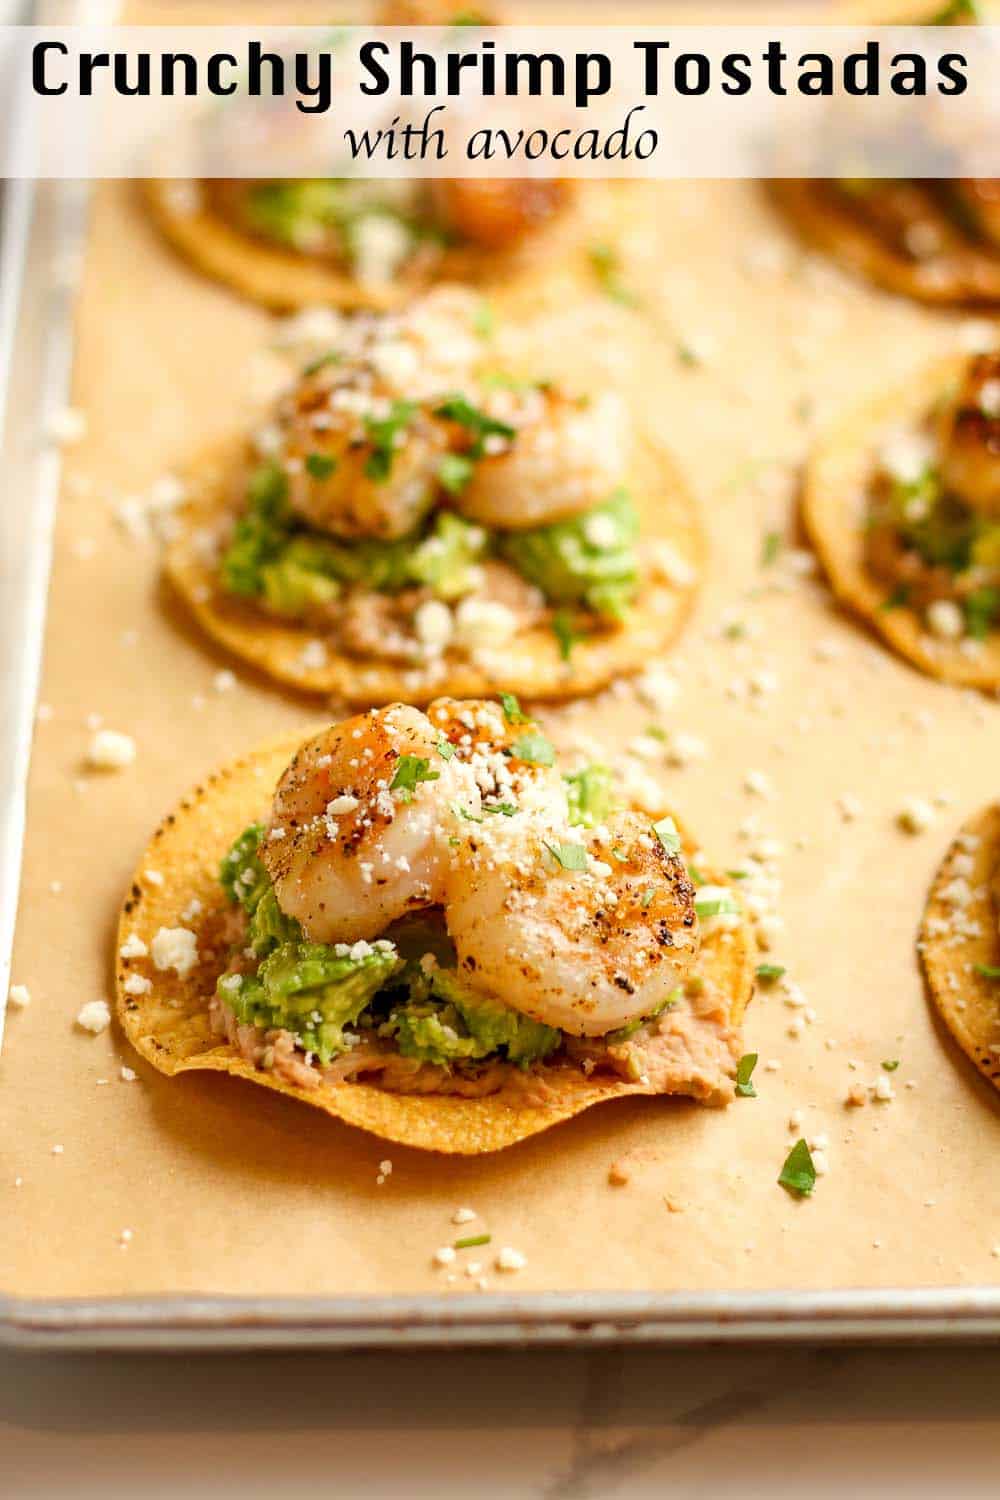 Side view of a pan of tostadas with refried beans, avocado, and grilled shrimp.